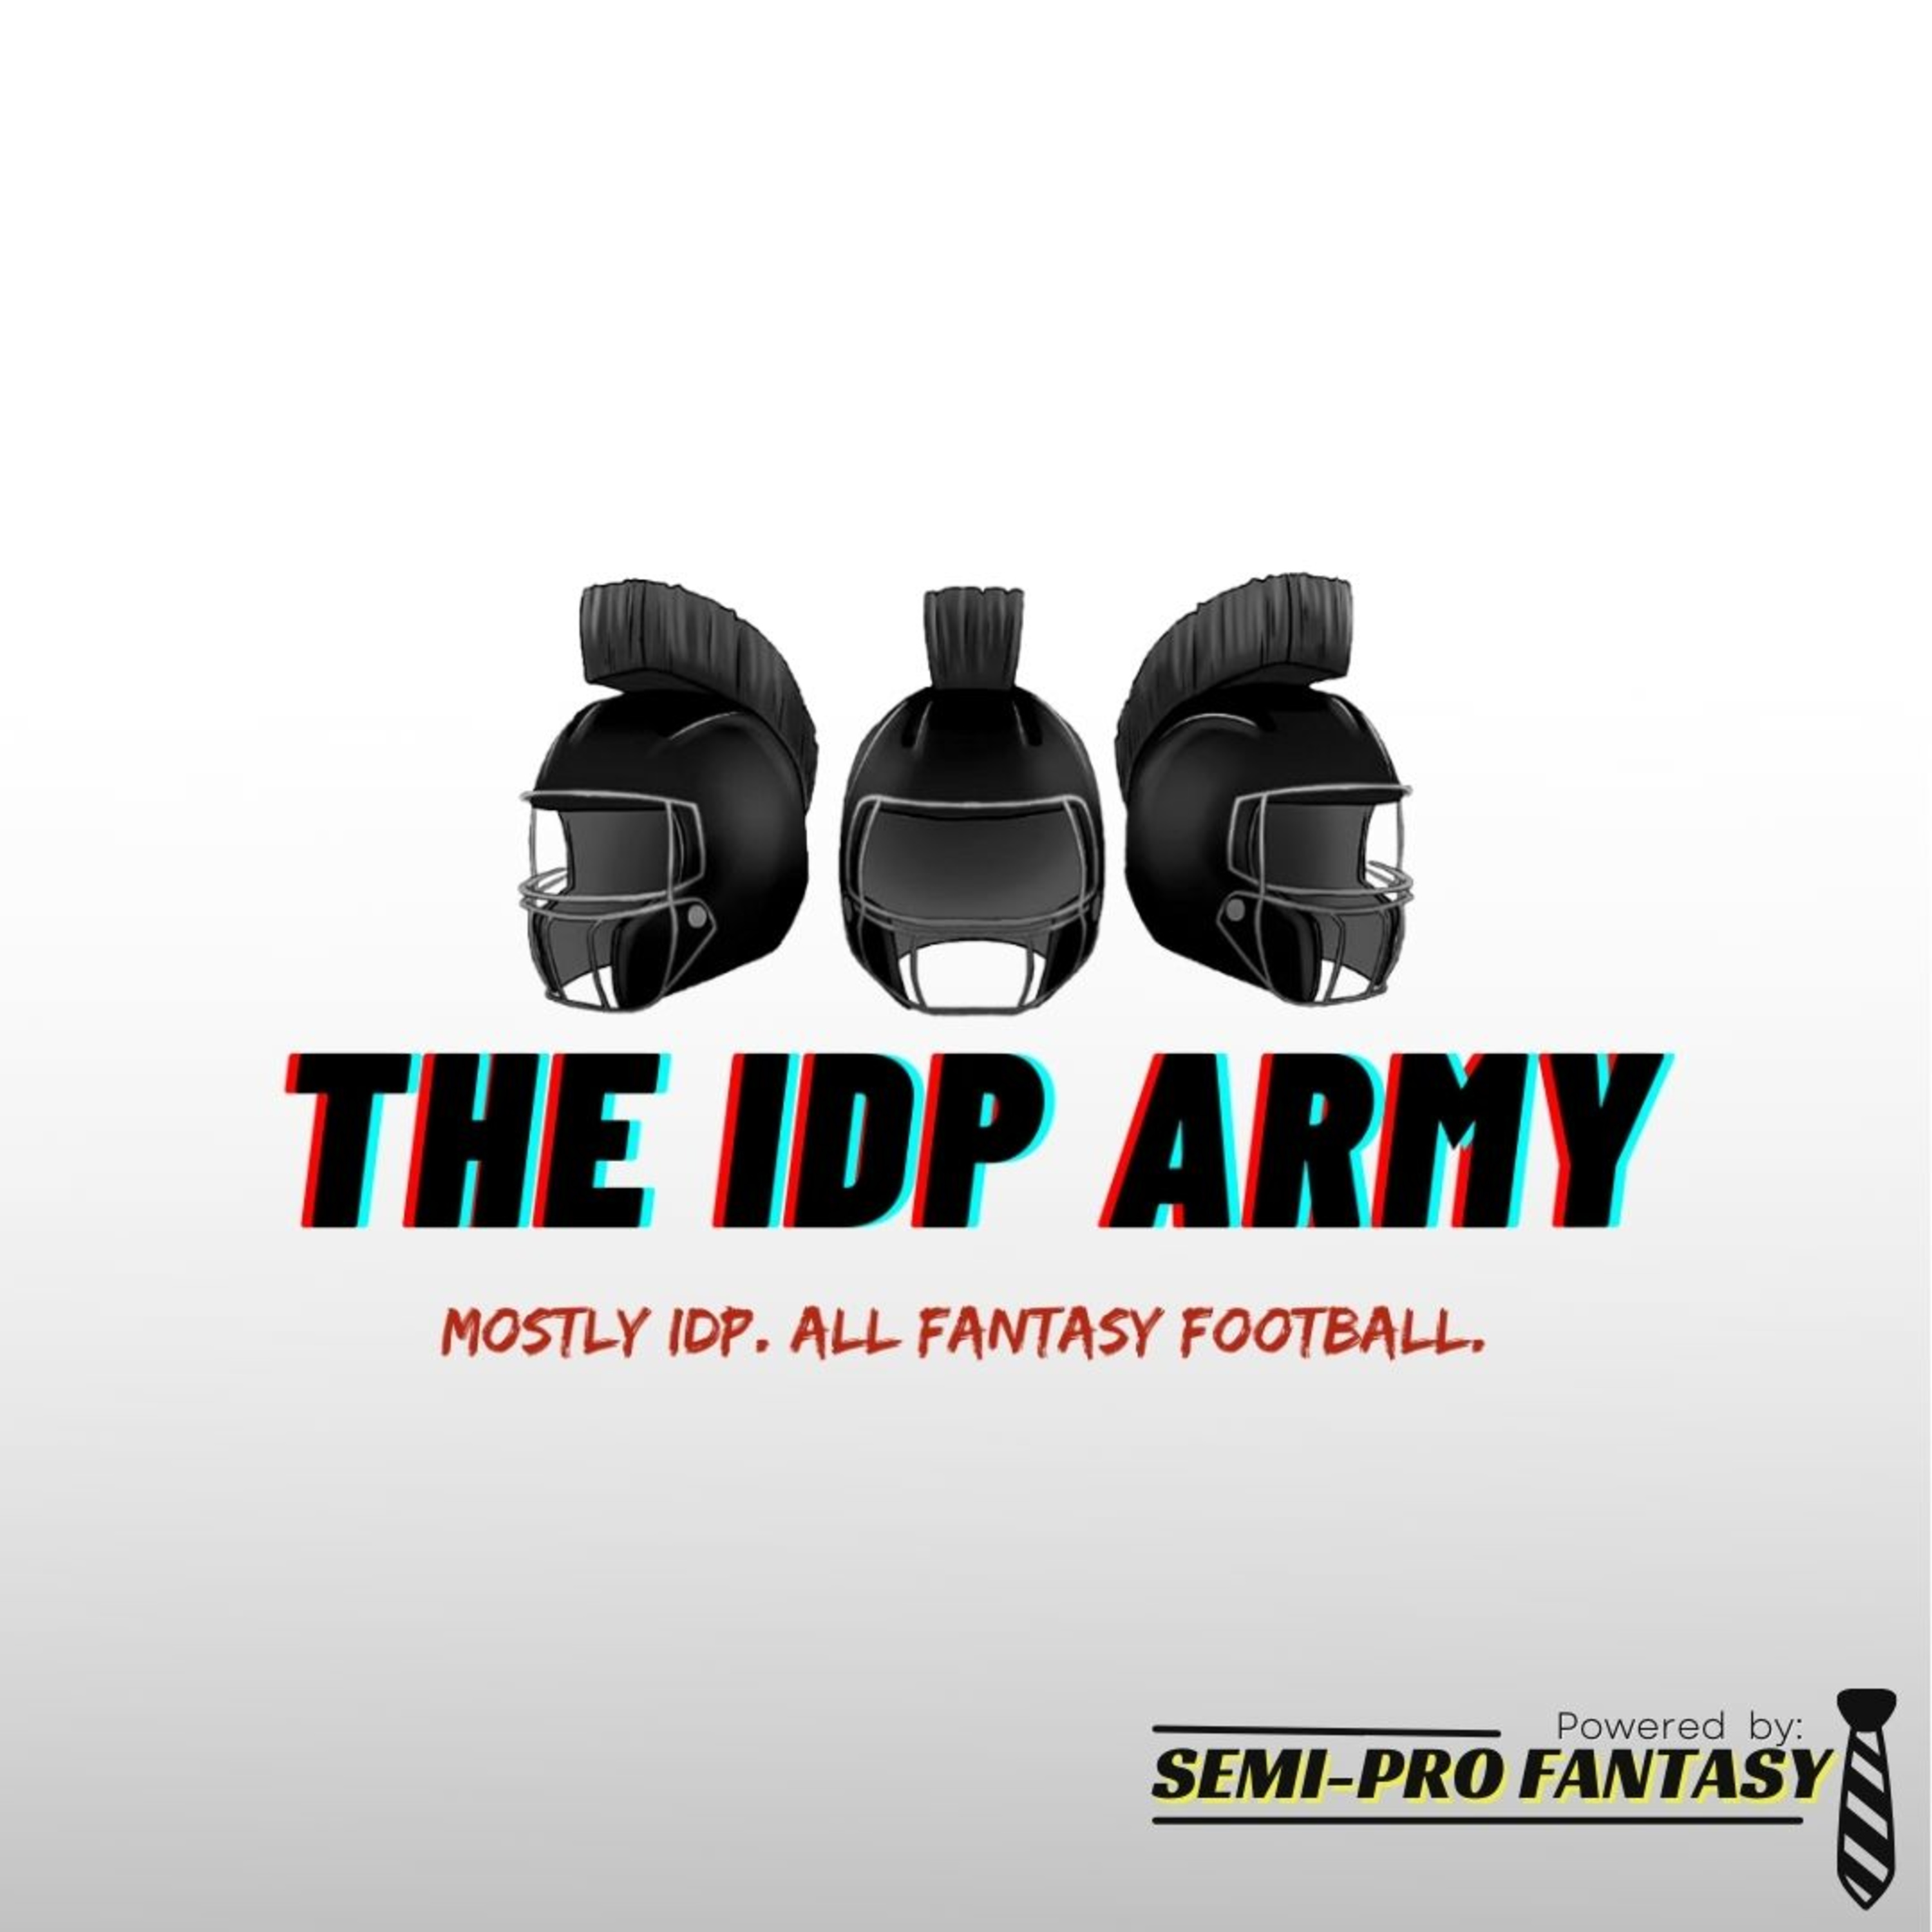 Zero WR + Chicago Bears and New York Giants Fantasy Outlook | The IDP Army (Ep.38) - Fantasy Football Podcast